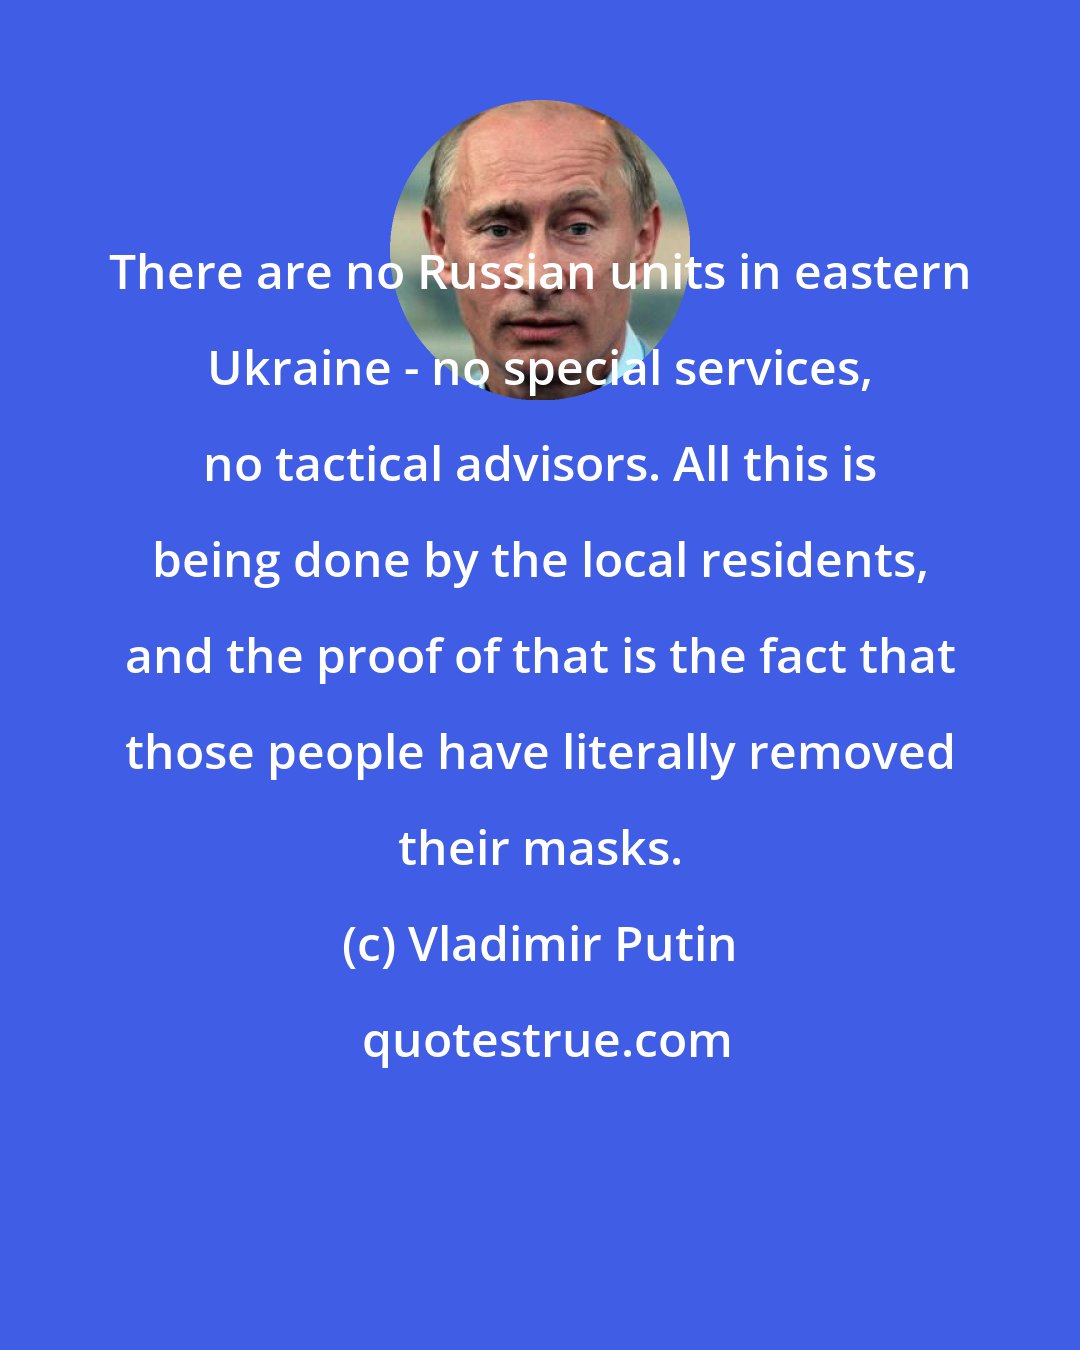 Vladimir Putin: There are no Russian units in eastern Ukraine - no special services, no tactical advisors. All this is being done by the local residents, and the proof of that is the fact that those people have literally removed their masks.